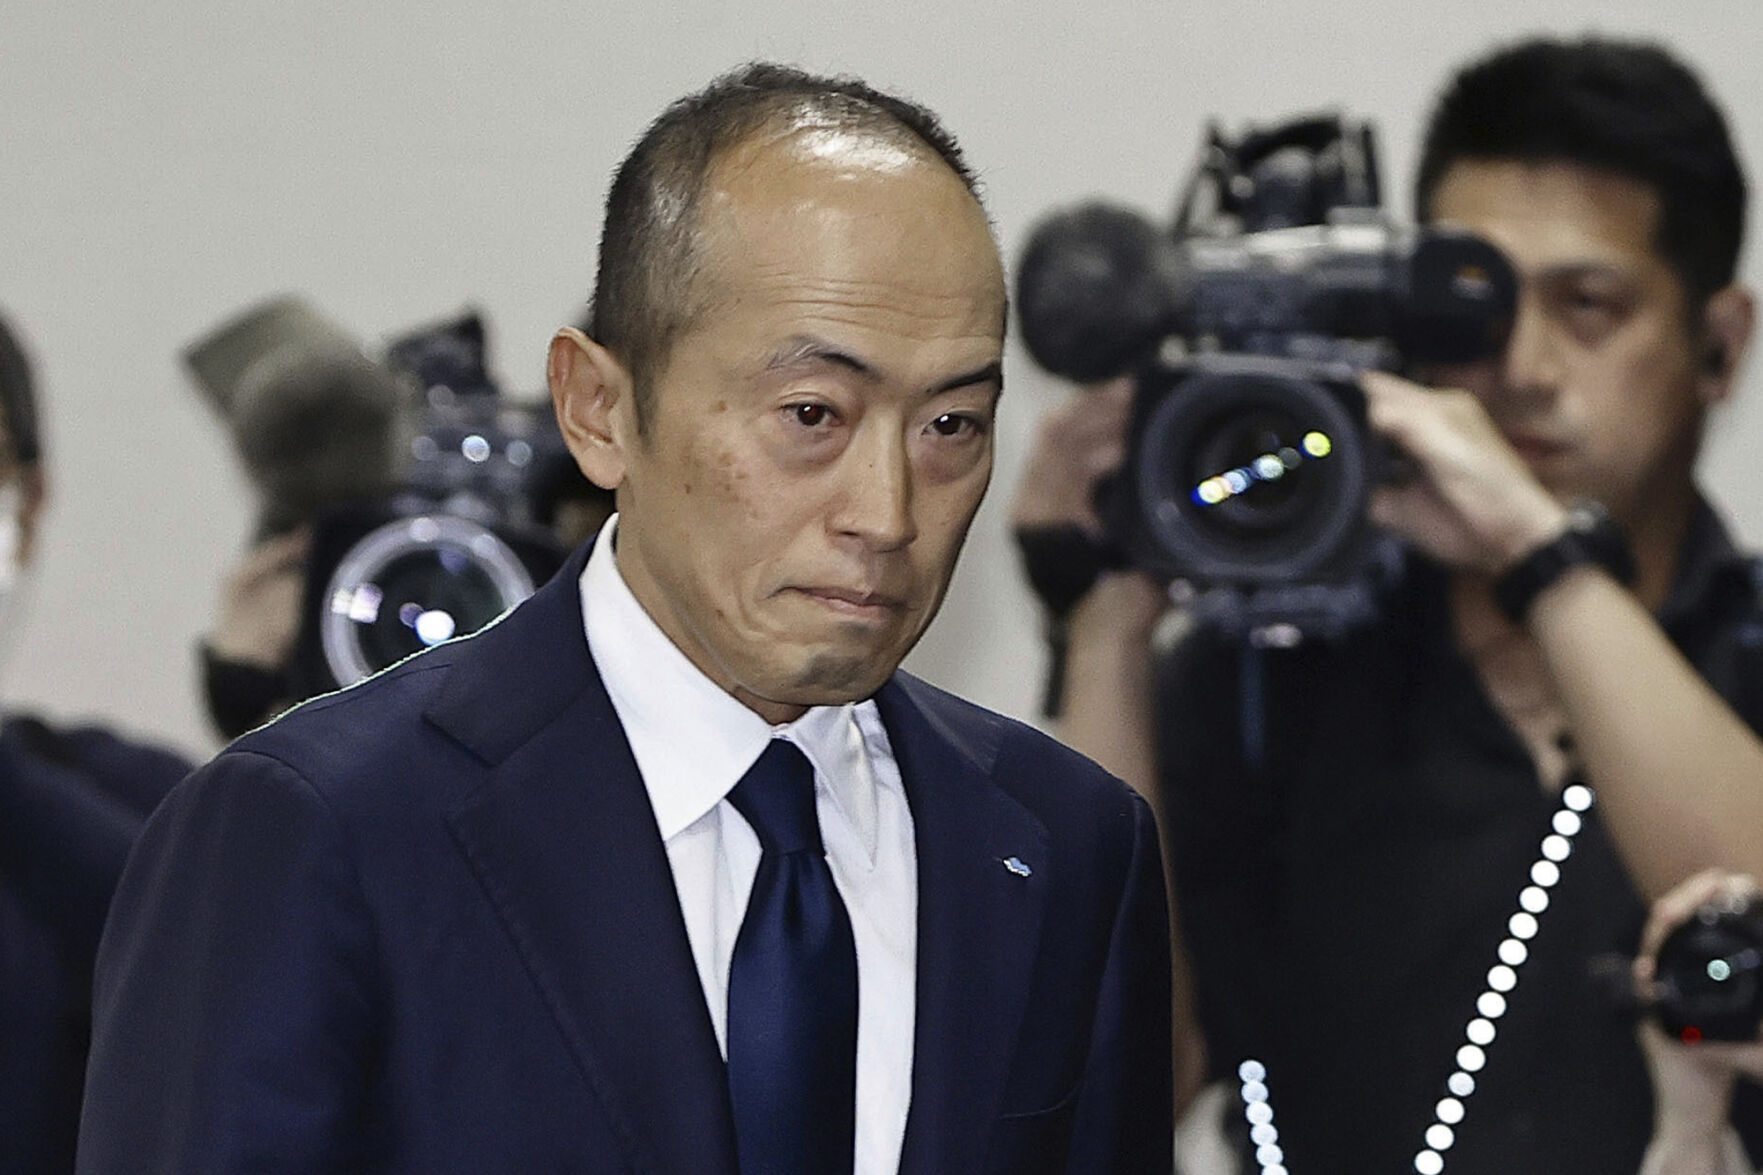 <p>Akihiro Kobayashi, president of Kobayashi Pharmaceutical Co., arrives at a news conference in Osaka, western Japan, Friday, March 29, 2024. In the week since a line of Japanese health supplements began being recalled, several people have died and more than 100 people were hospitalized as of Friday. The Osaka-based pharmaceutical company came under fire for not going public quickly with problems known internally as early as January. The first public announcement came March 22. (Yohei Fukuyama/Kyodo News via AP)</p>   PHOTO CREDIT: Yohei Fukuyama - foreign subscriber, ASSOCIATED PRESS